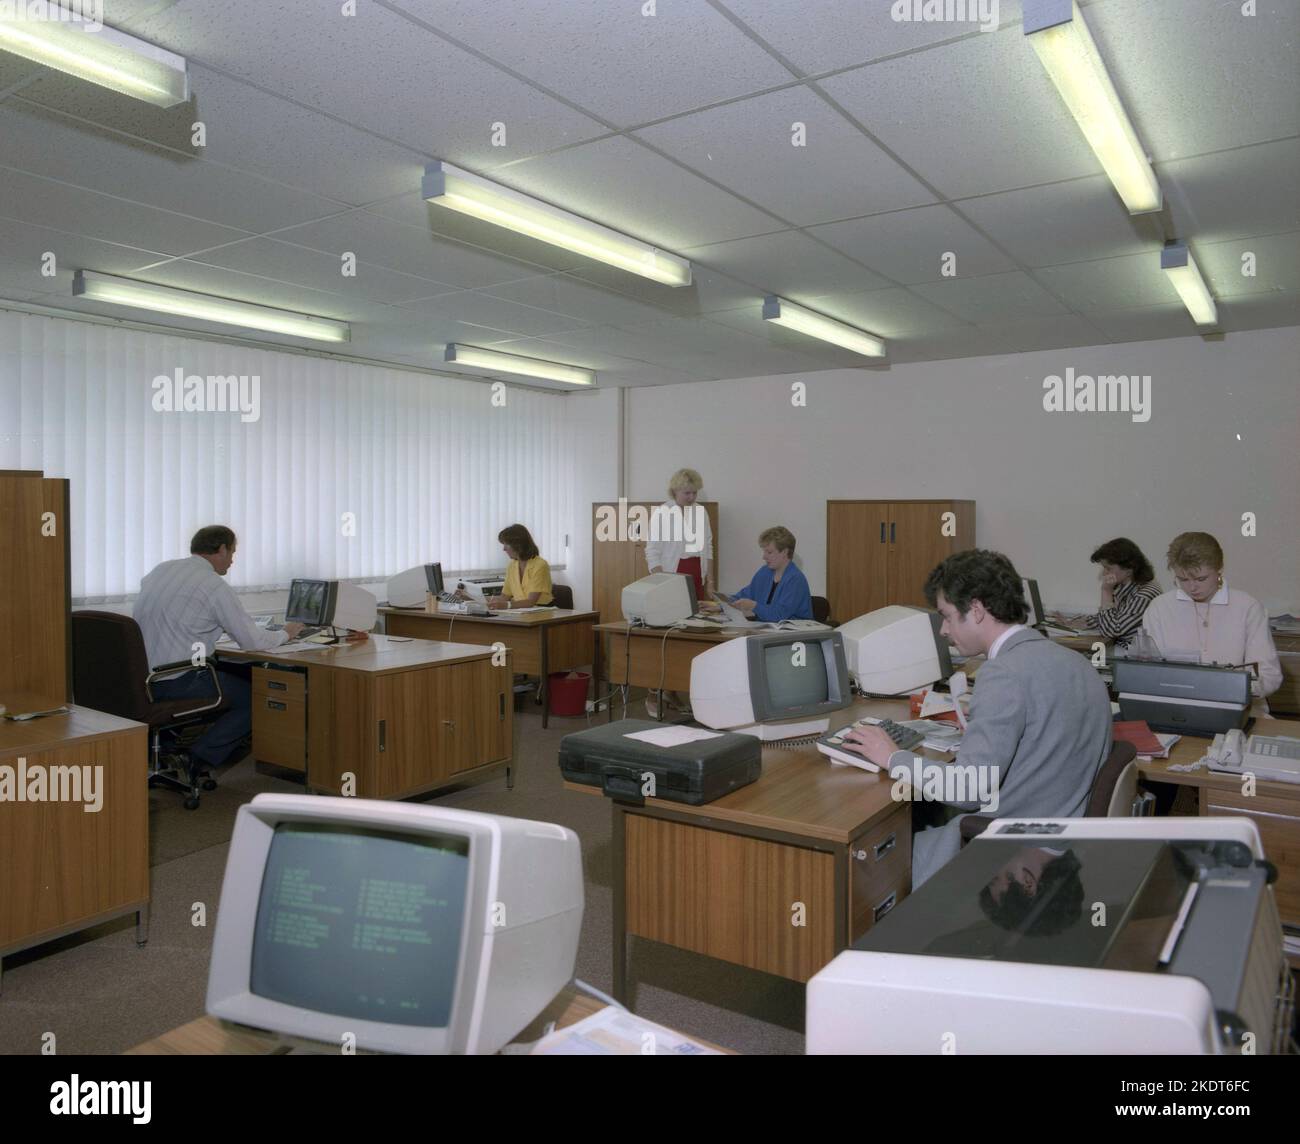 1980s, historical, view across an open office of the era, male and female employees working at desks, using small desk-top computer terminals, most likely made by IBM, England, UK. Being CRT monitors they displayed text in green, as seen in the picture and so became known as green screen terminals. Stock Photo